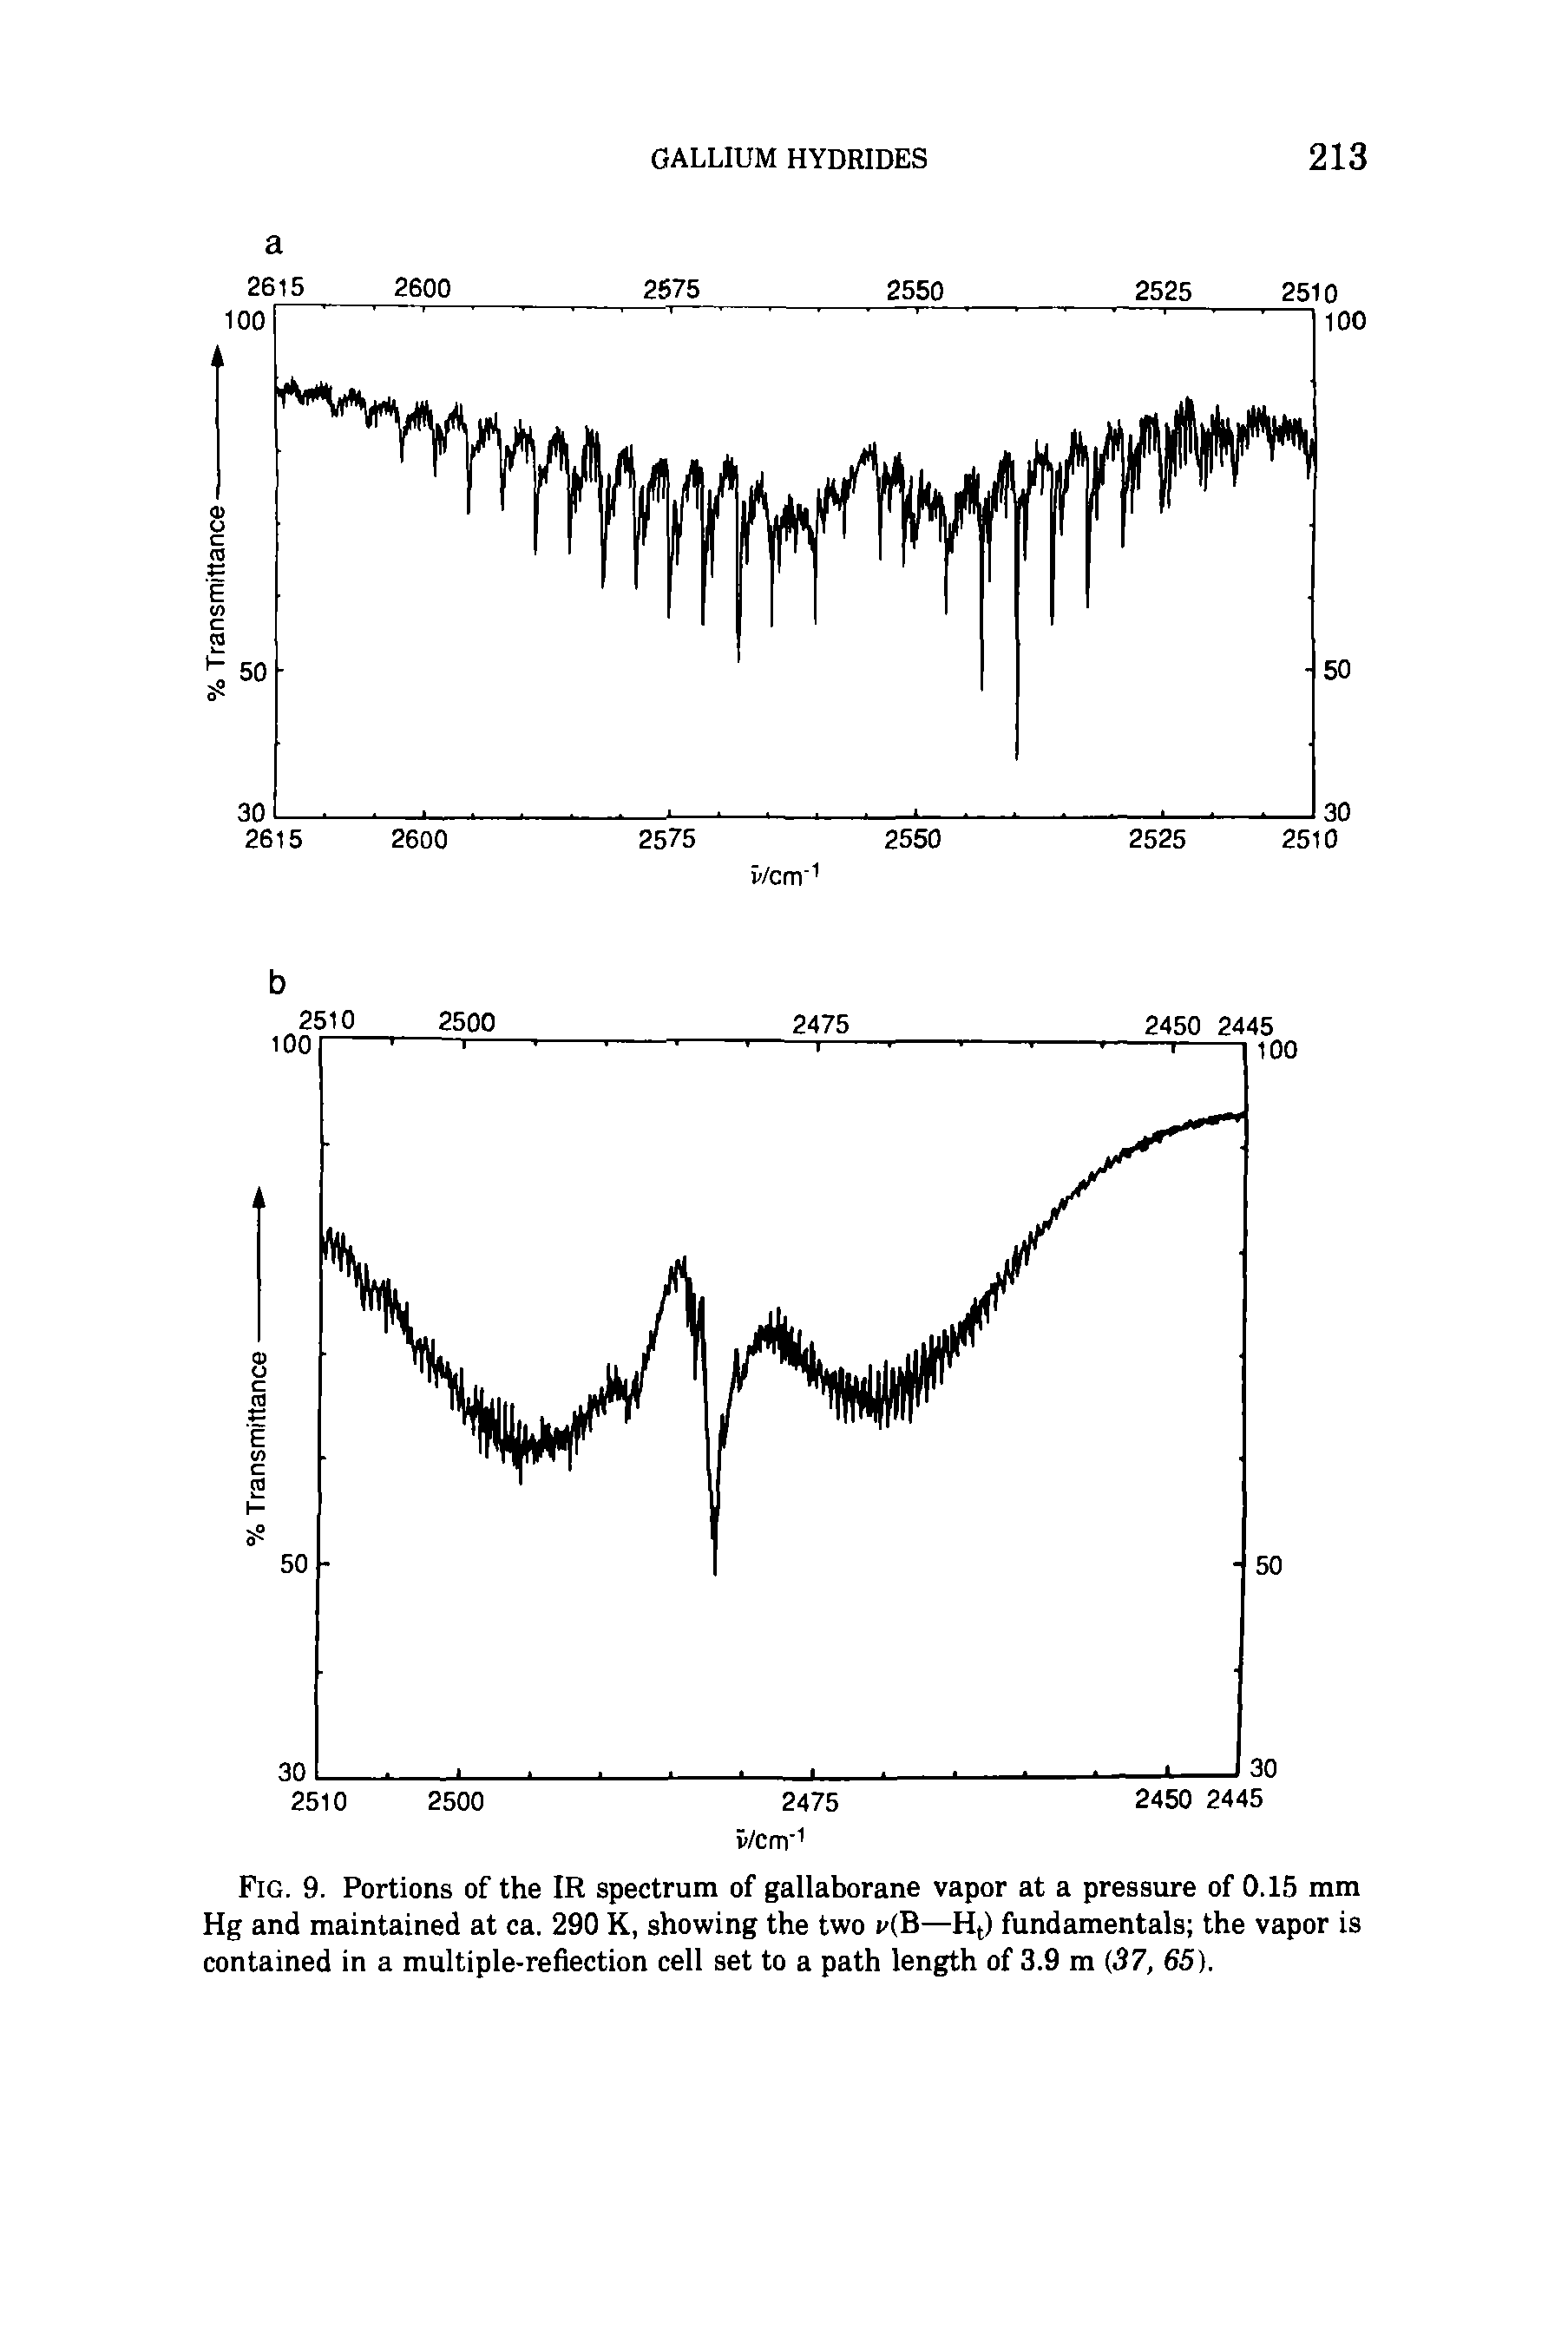 Fig. 9. Portions of the IR spectrum of gallaborane vapor at a pressure of 0.15 mm Hg and maintained at ca. 290 K, showing the two v(B—Ht) fundamentals the vapor is contained in a multiple-reflection cell set to a path length of 3.9 m (37, 65).